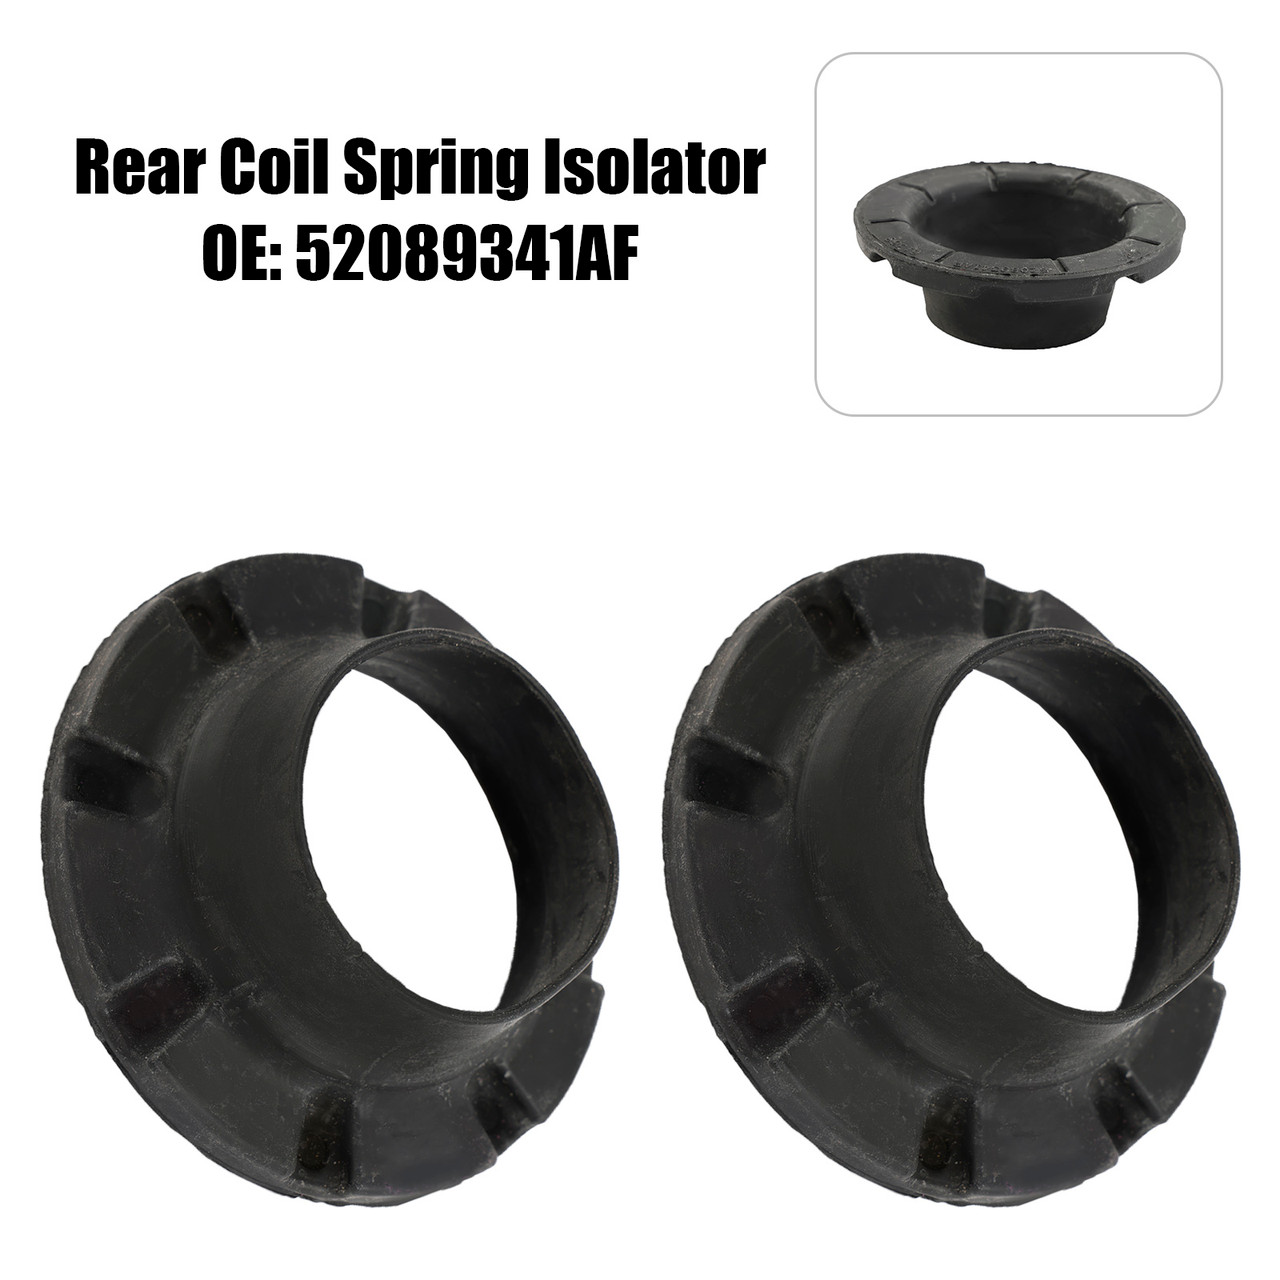 2 x Rear Coil Spring Isolator 52089341AF for Jeep Grand Cherokee WK 2005-2010